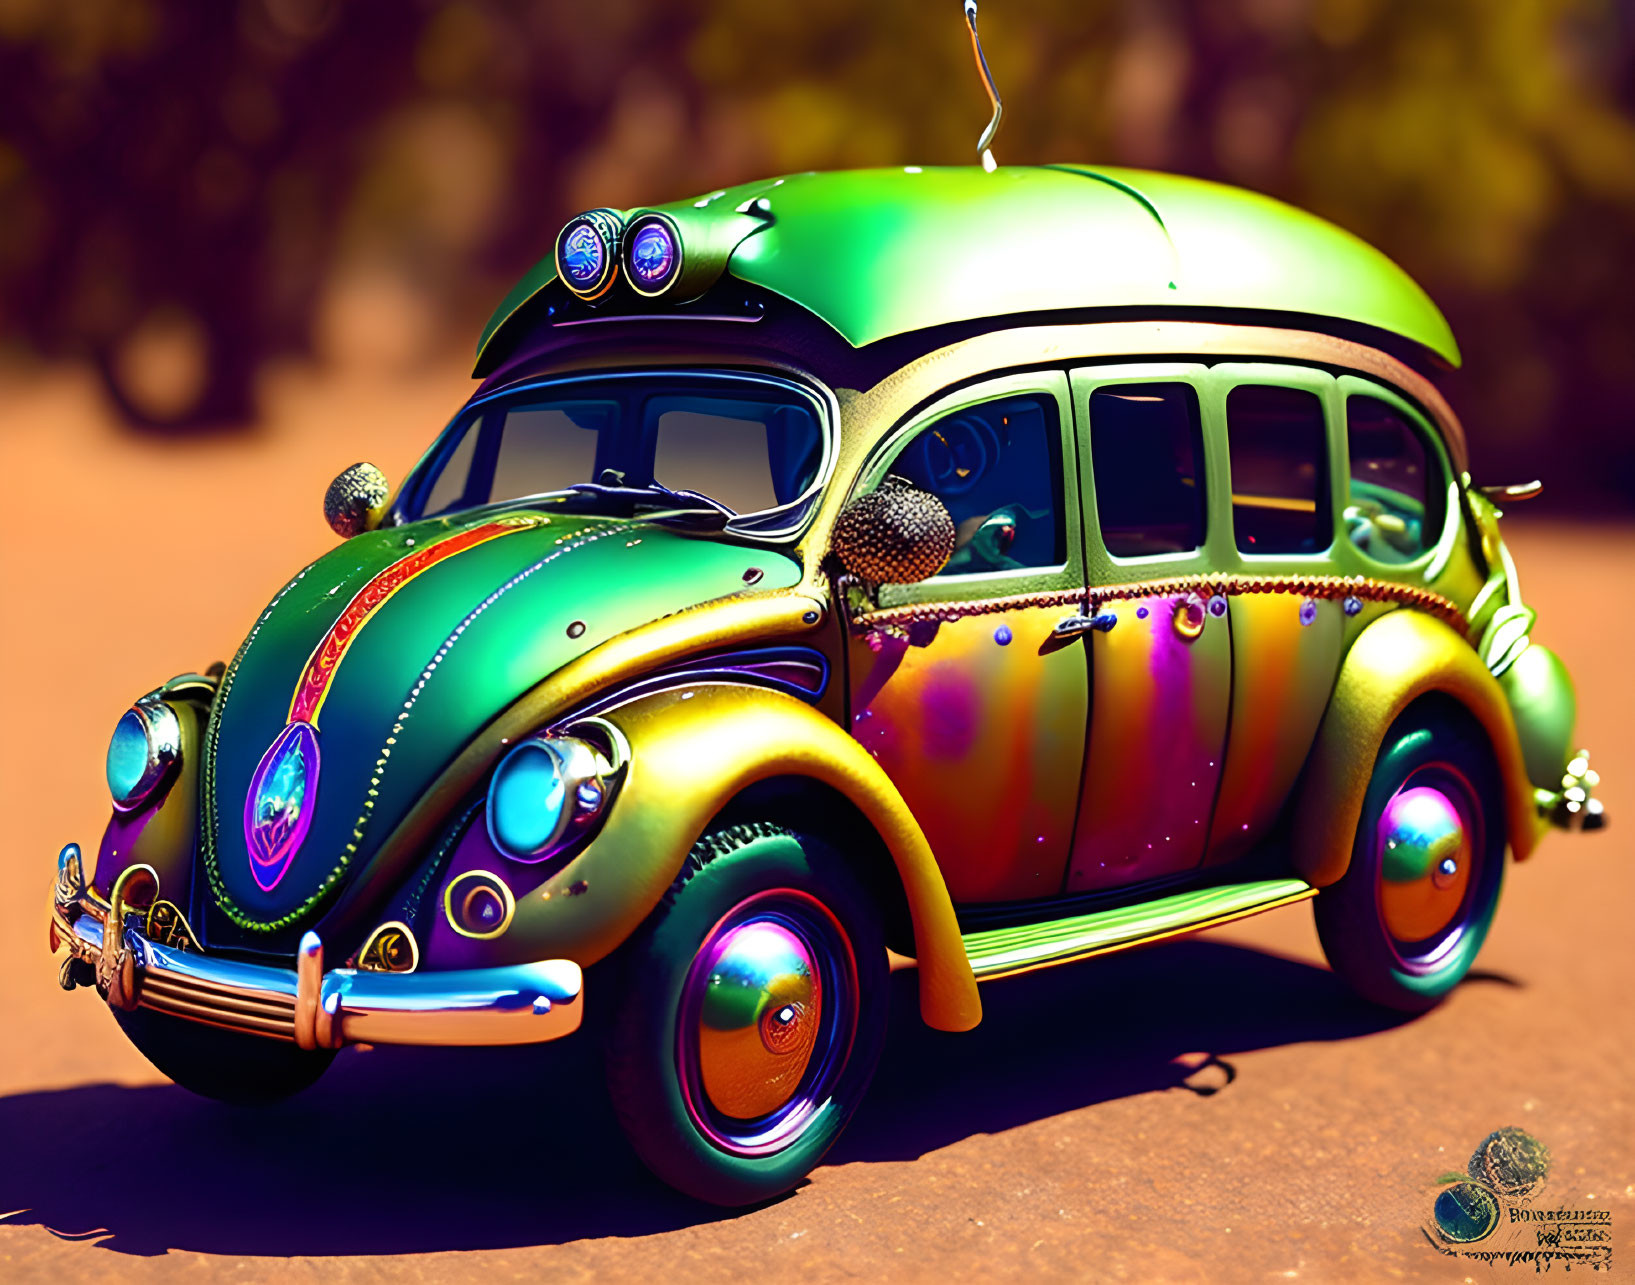 Custom Volkswagen Beetle with Psychedelic Paintwork and Additional Lights